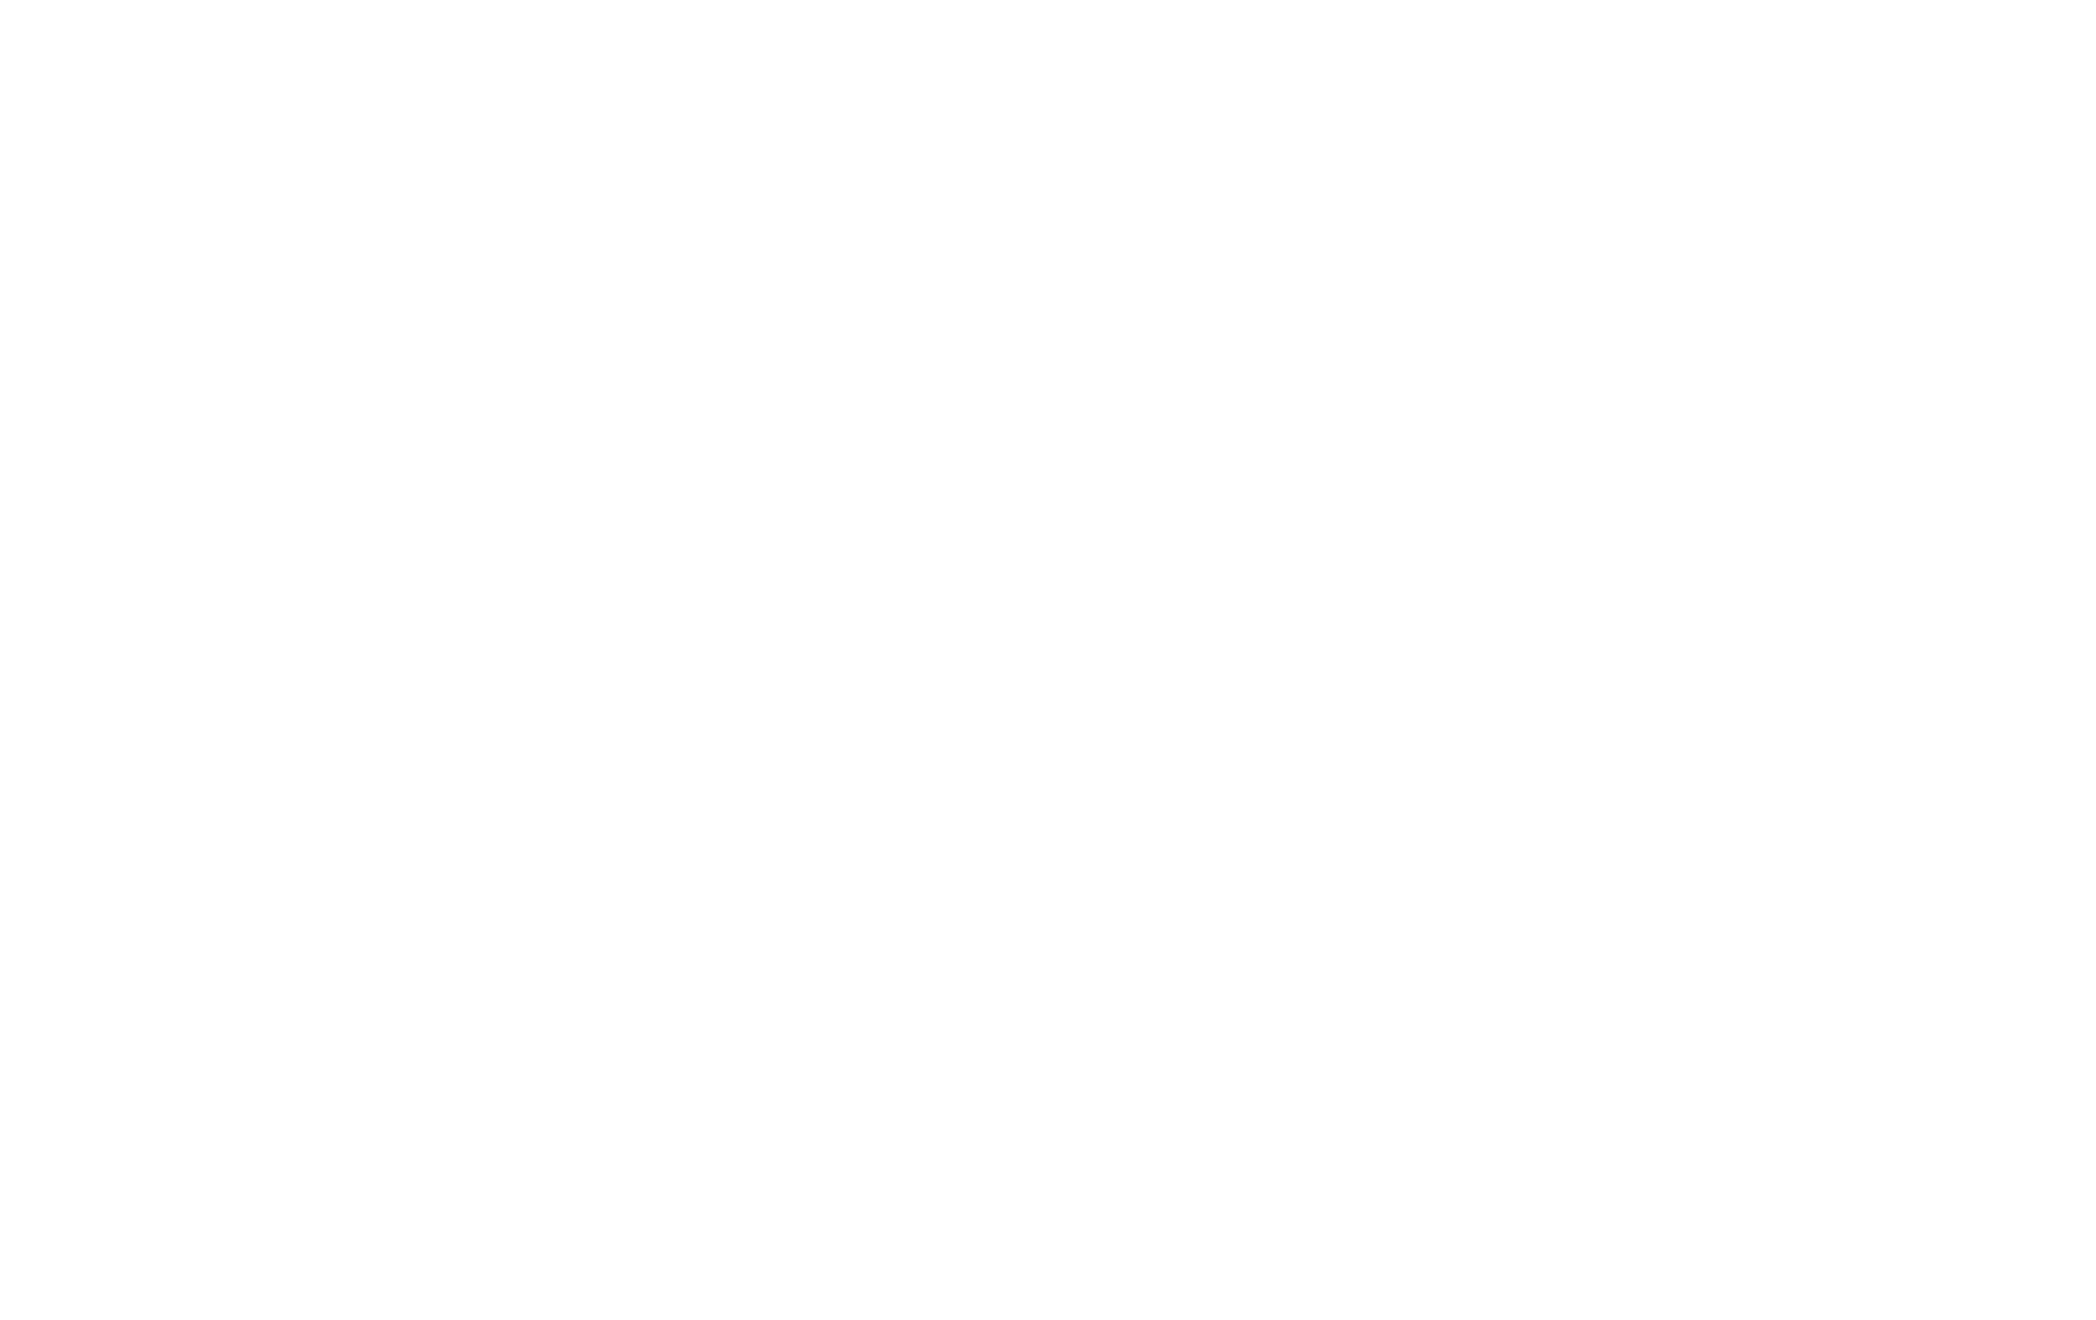 Sanctuary Supported Living